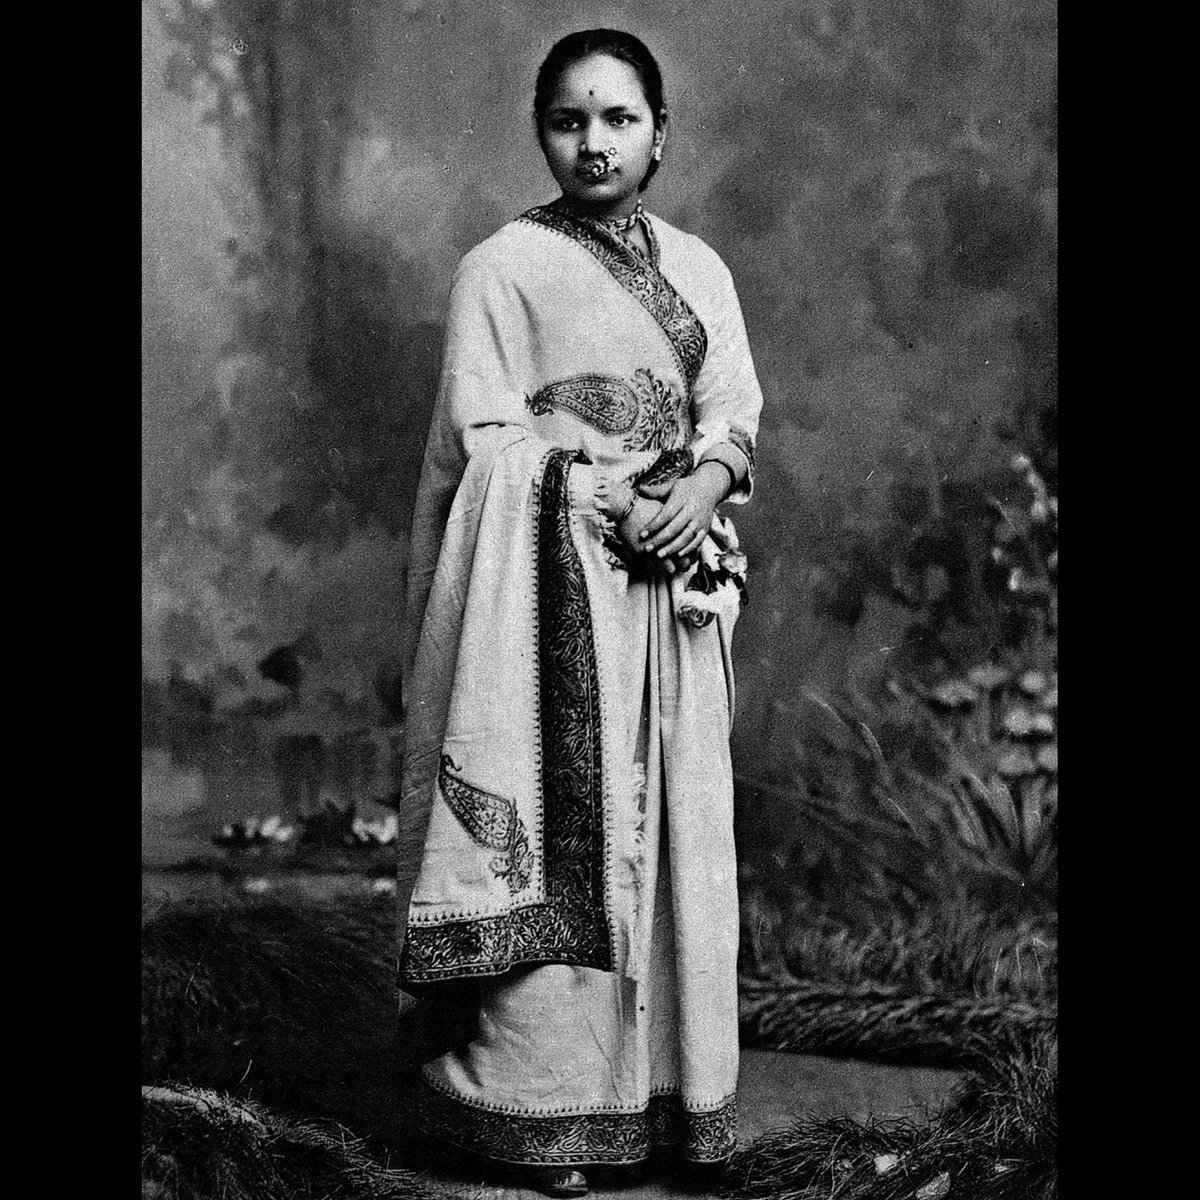 4/8 Joshi was celebrated upon her return to India and was appointed physician-in-charge of the female ward of the Albert Edward Hospital. Tragically, though, she was never able to take her post as she never fully recovered from an earlier case of tuberculosis...